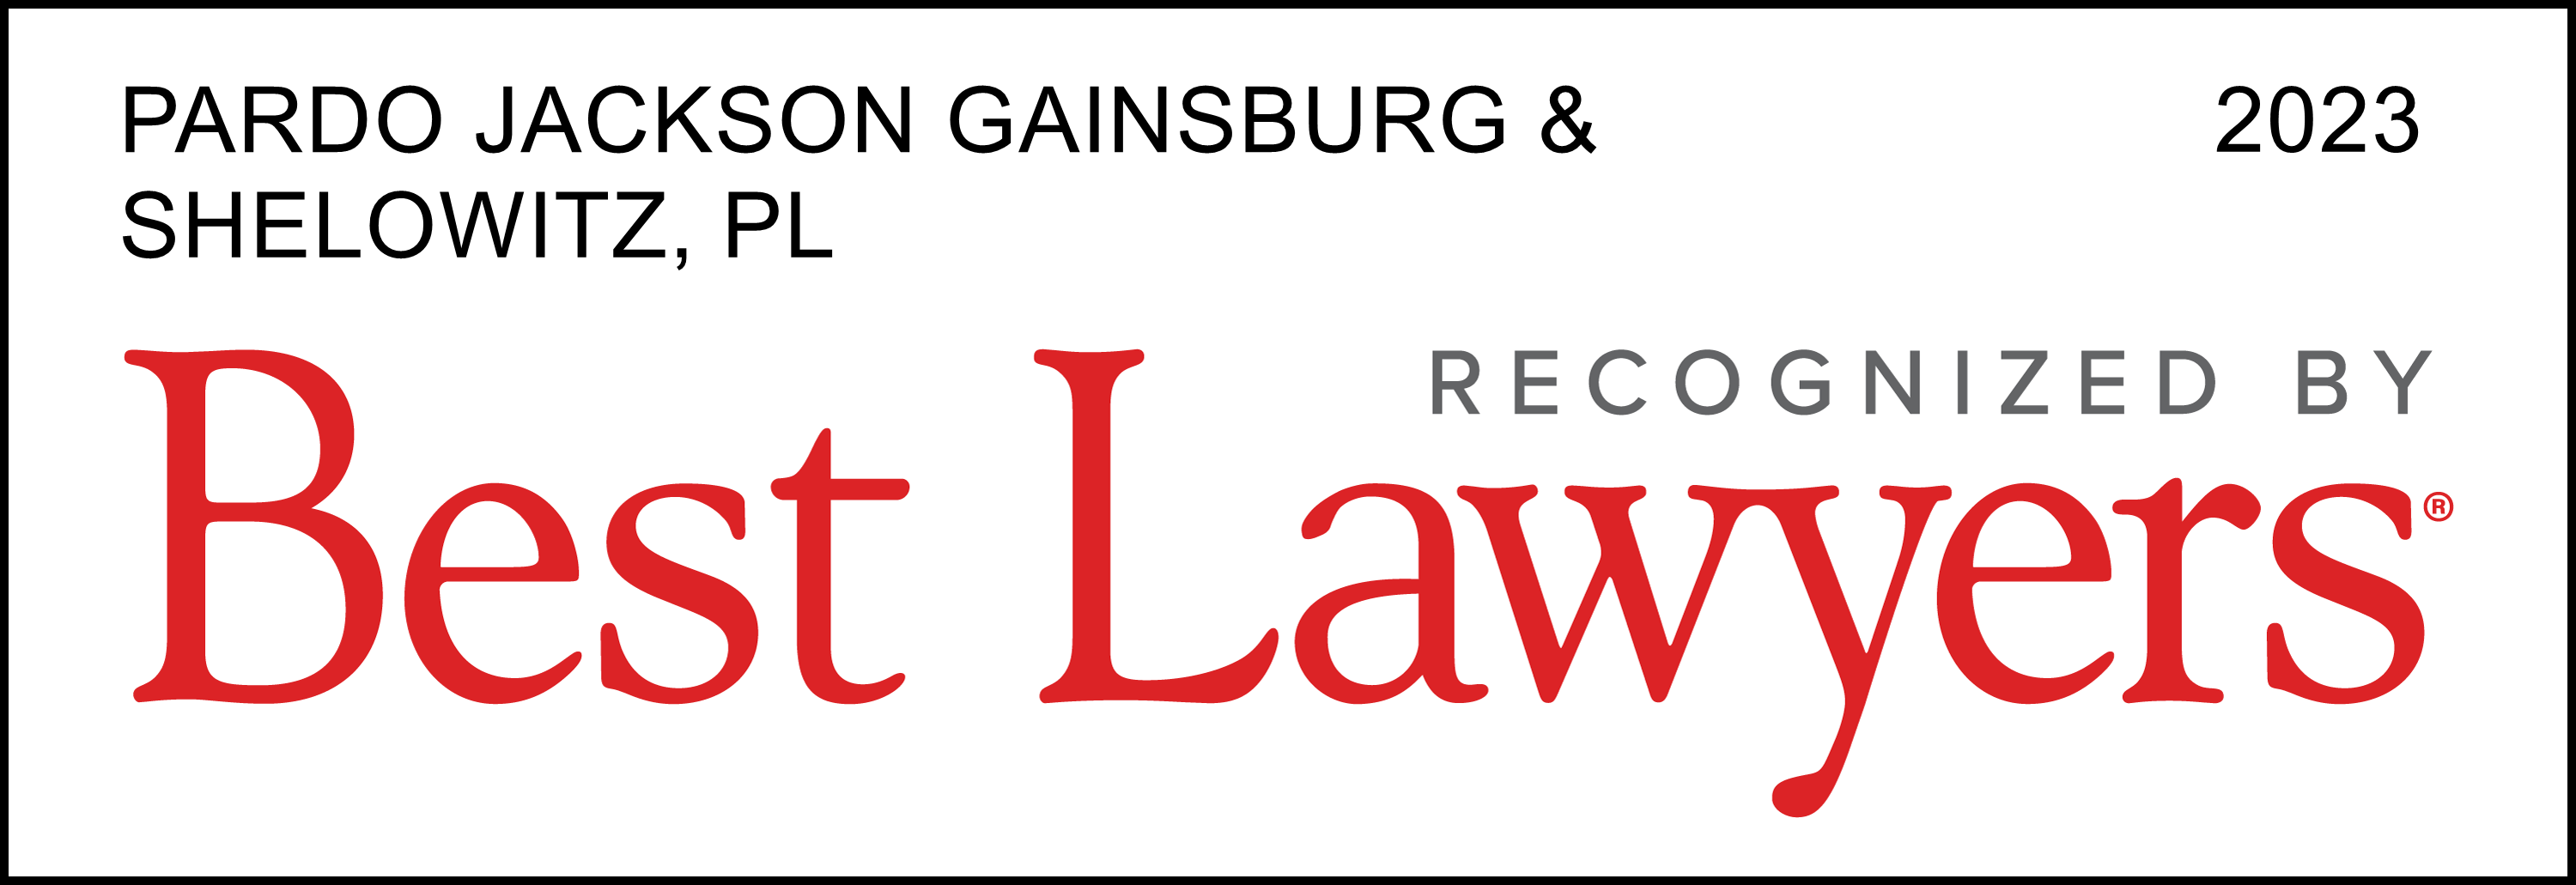 2022 Recognized by Best Lawyers